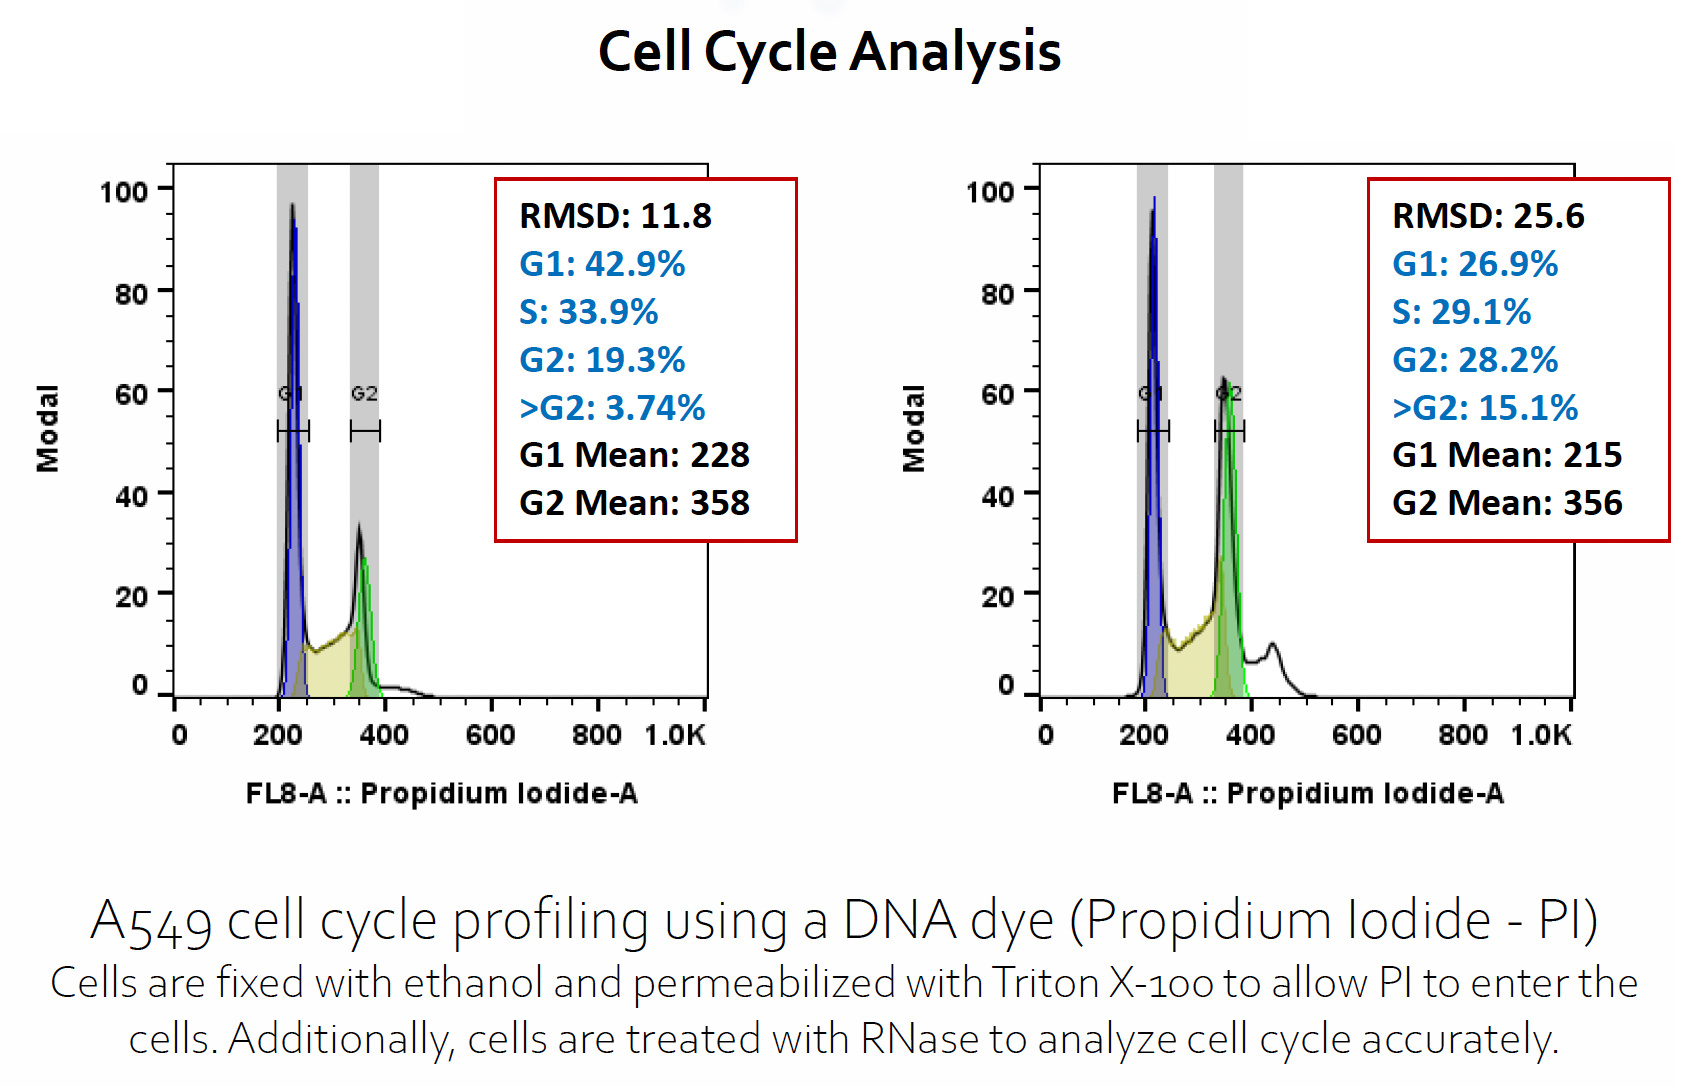 Flow analysis of cytotoxicity, DNA damanage, cell cycle and apoptosis